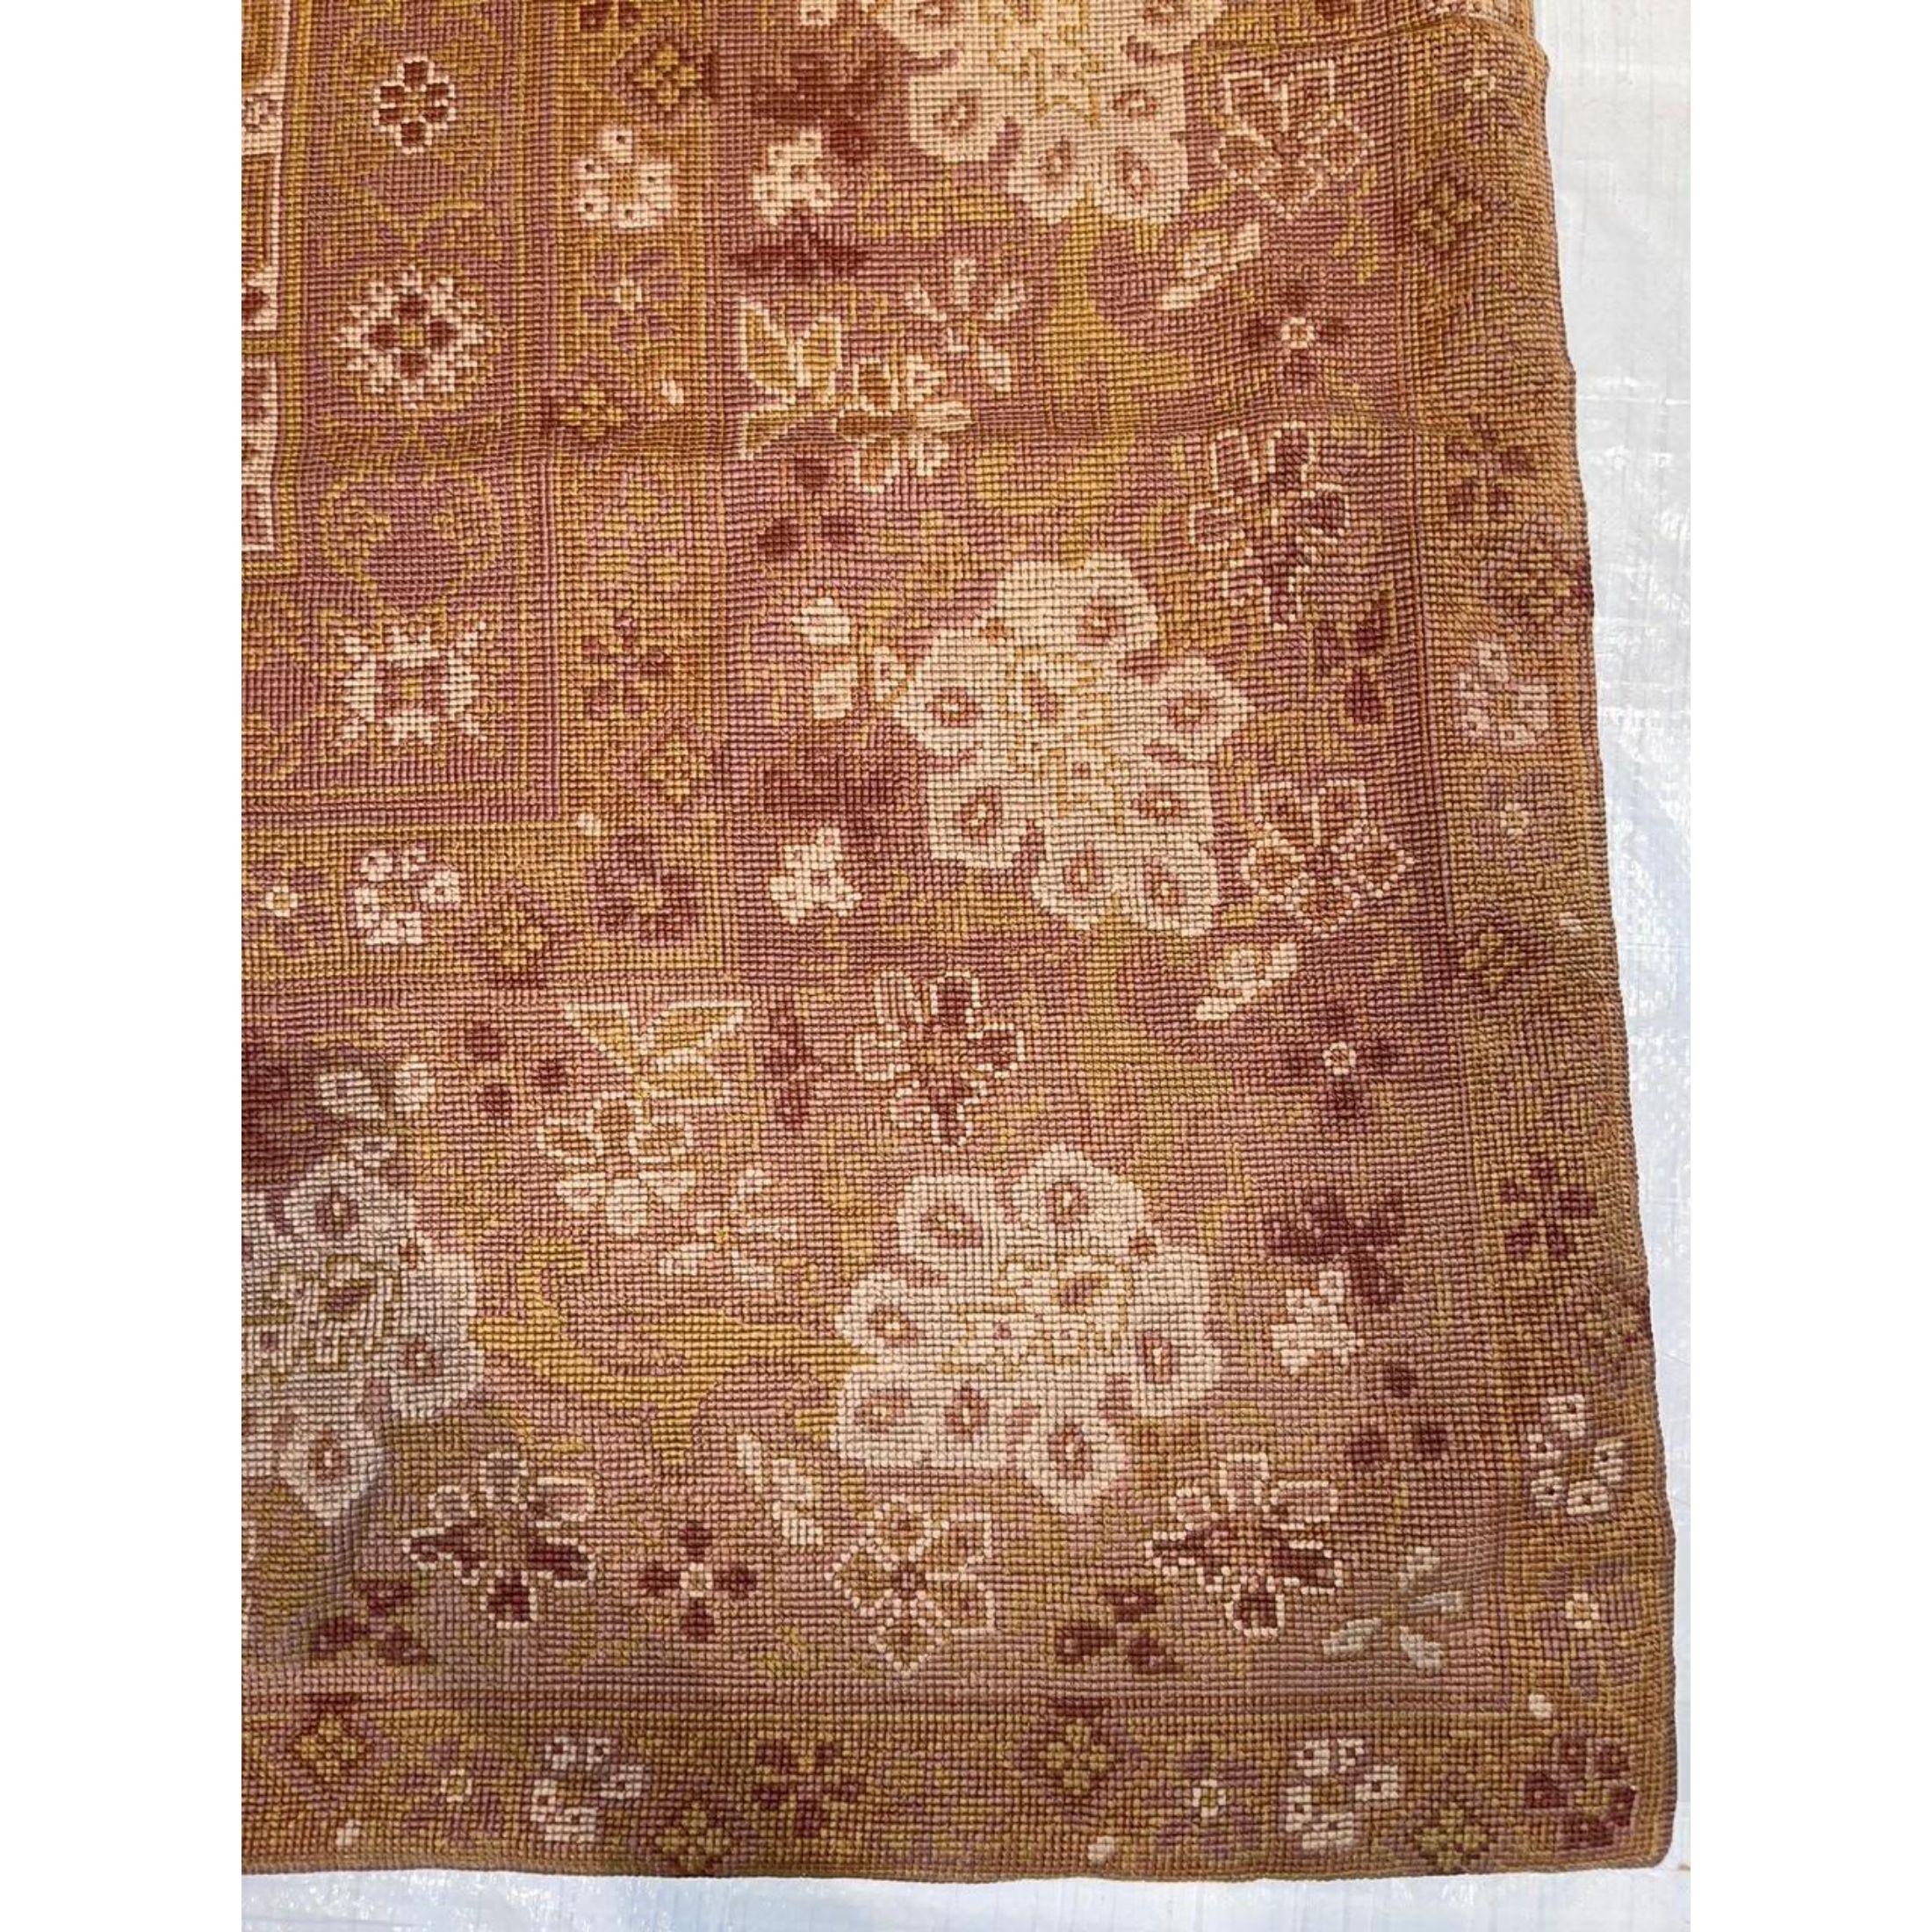 Other 1900s Antique French Needlepoint Rug For Sale